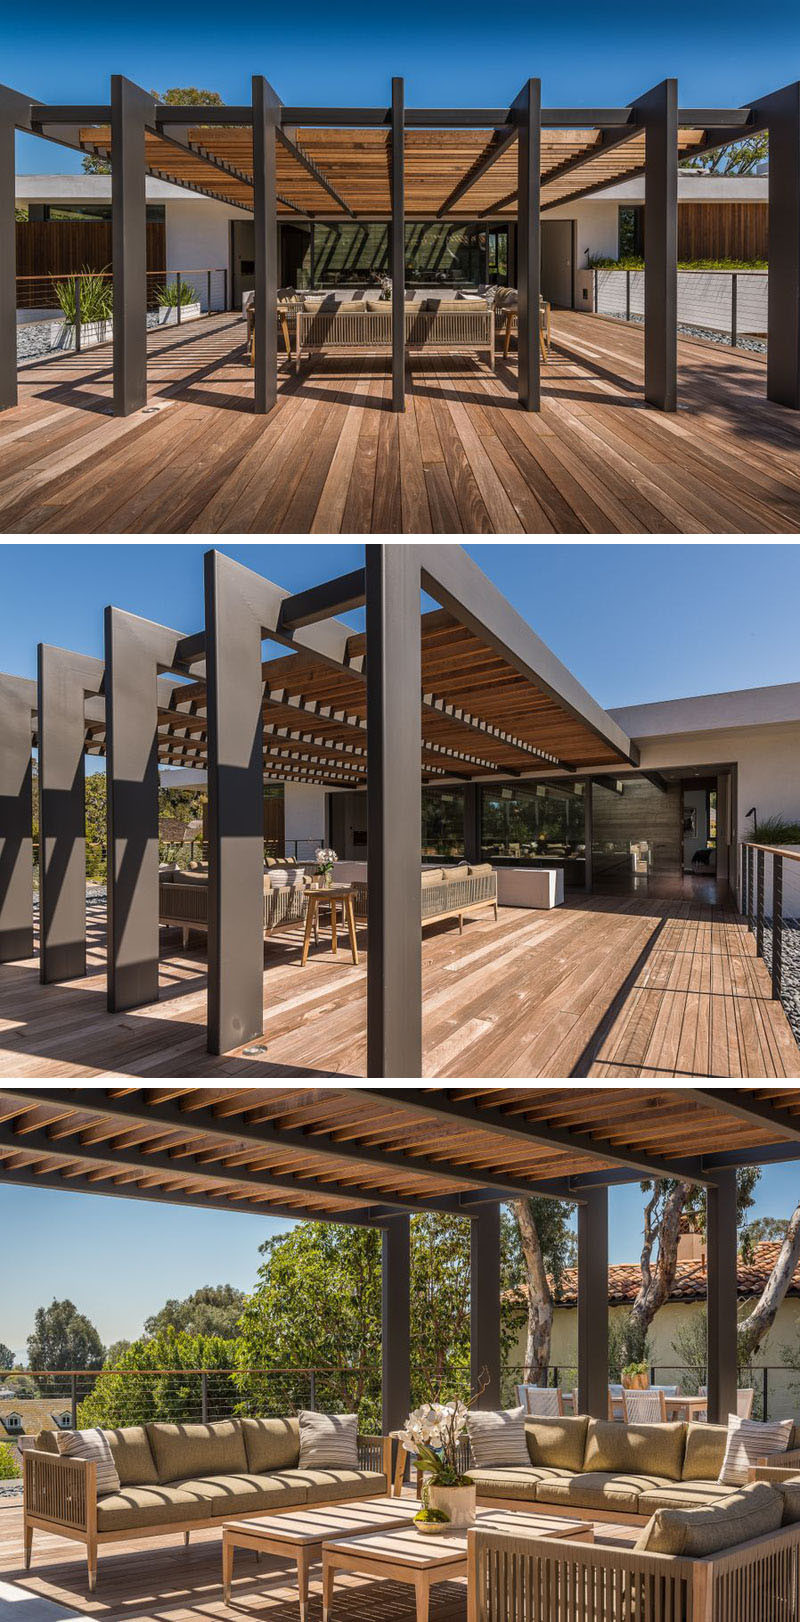 This large pergola that has enough space for a large outdoor lounge and dining area.